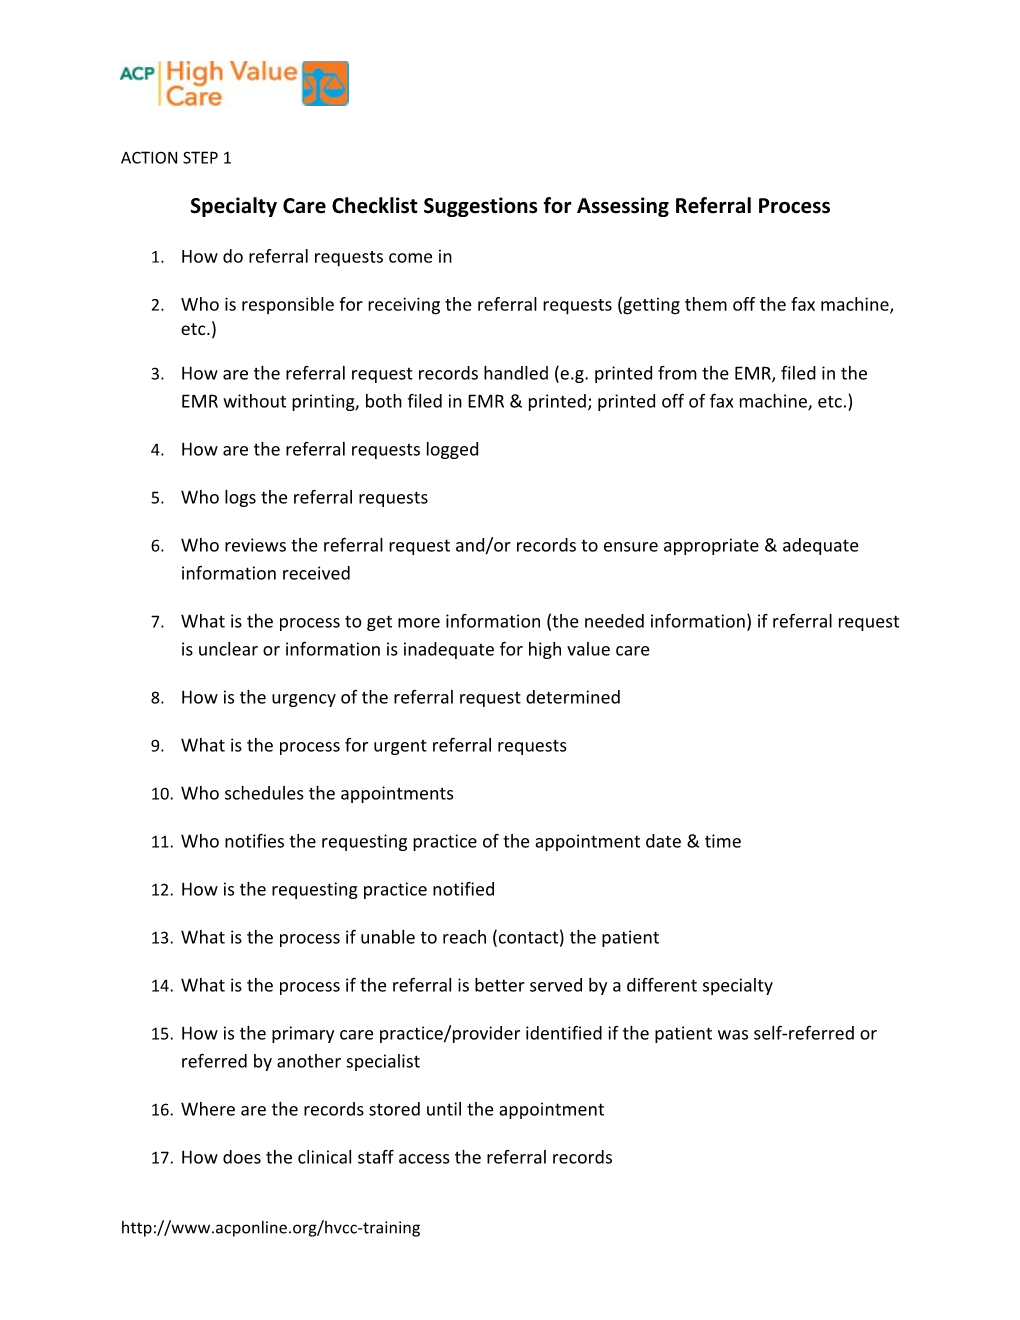 Specialty Care Checklist Suggestions for Assessing Referral Process